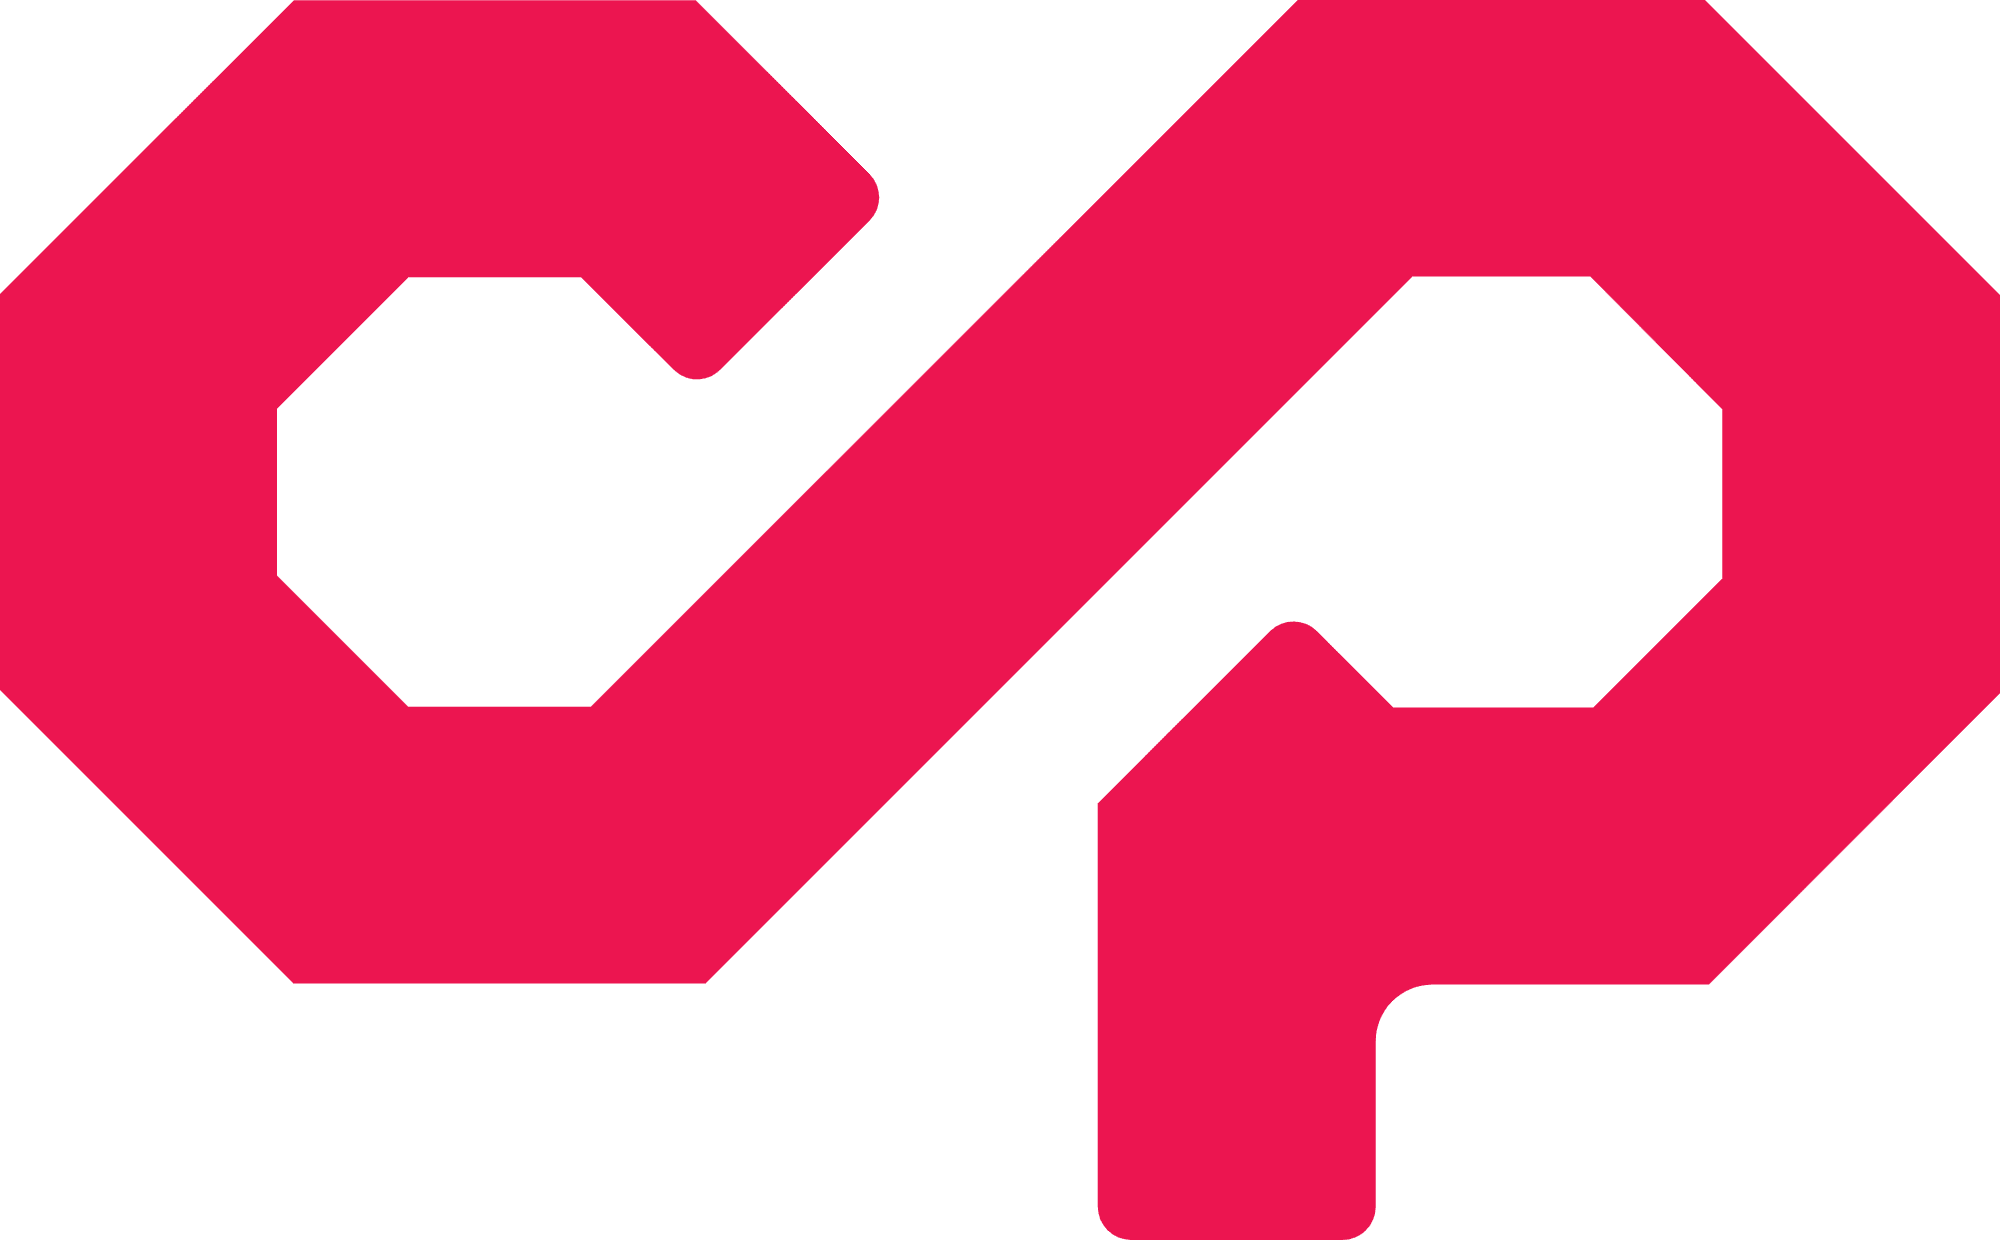 Counterparty logo in svg format